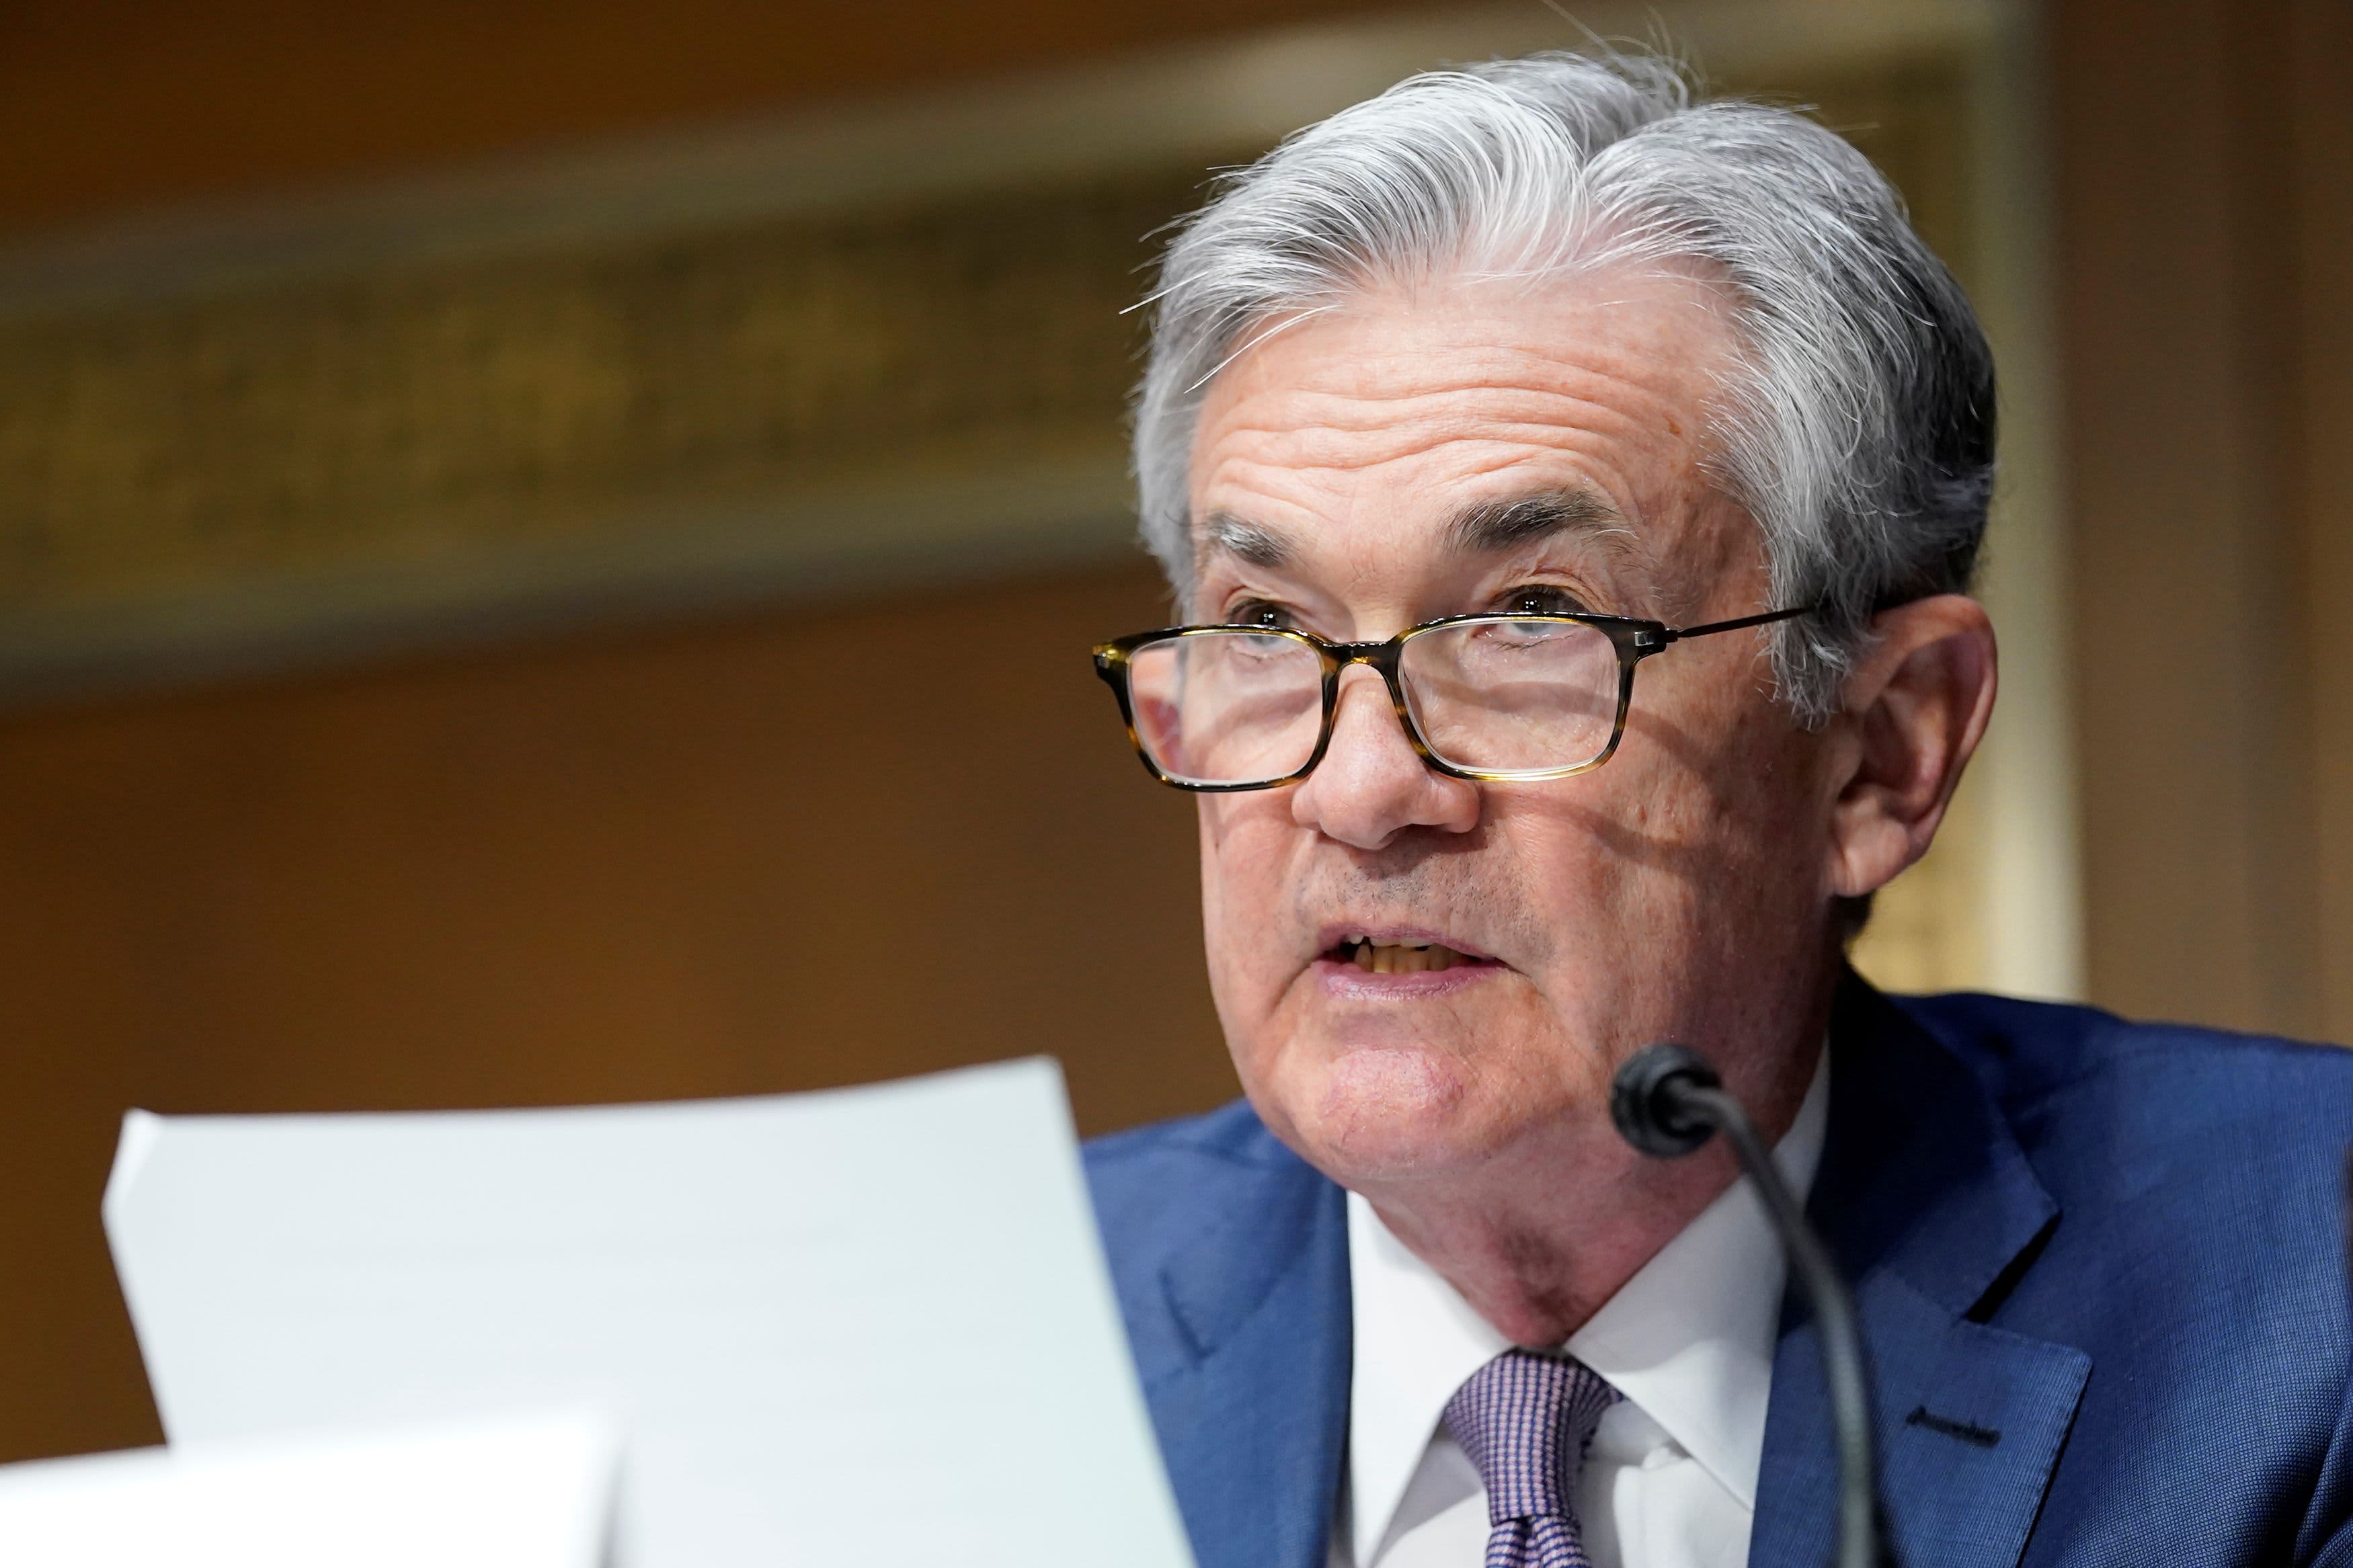 Fed will examine risks that climate change poses to the financial system